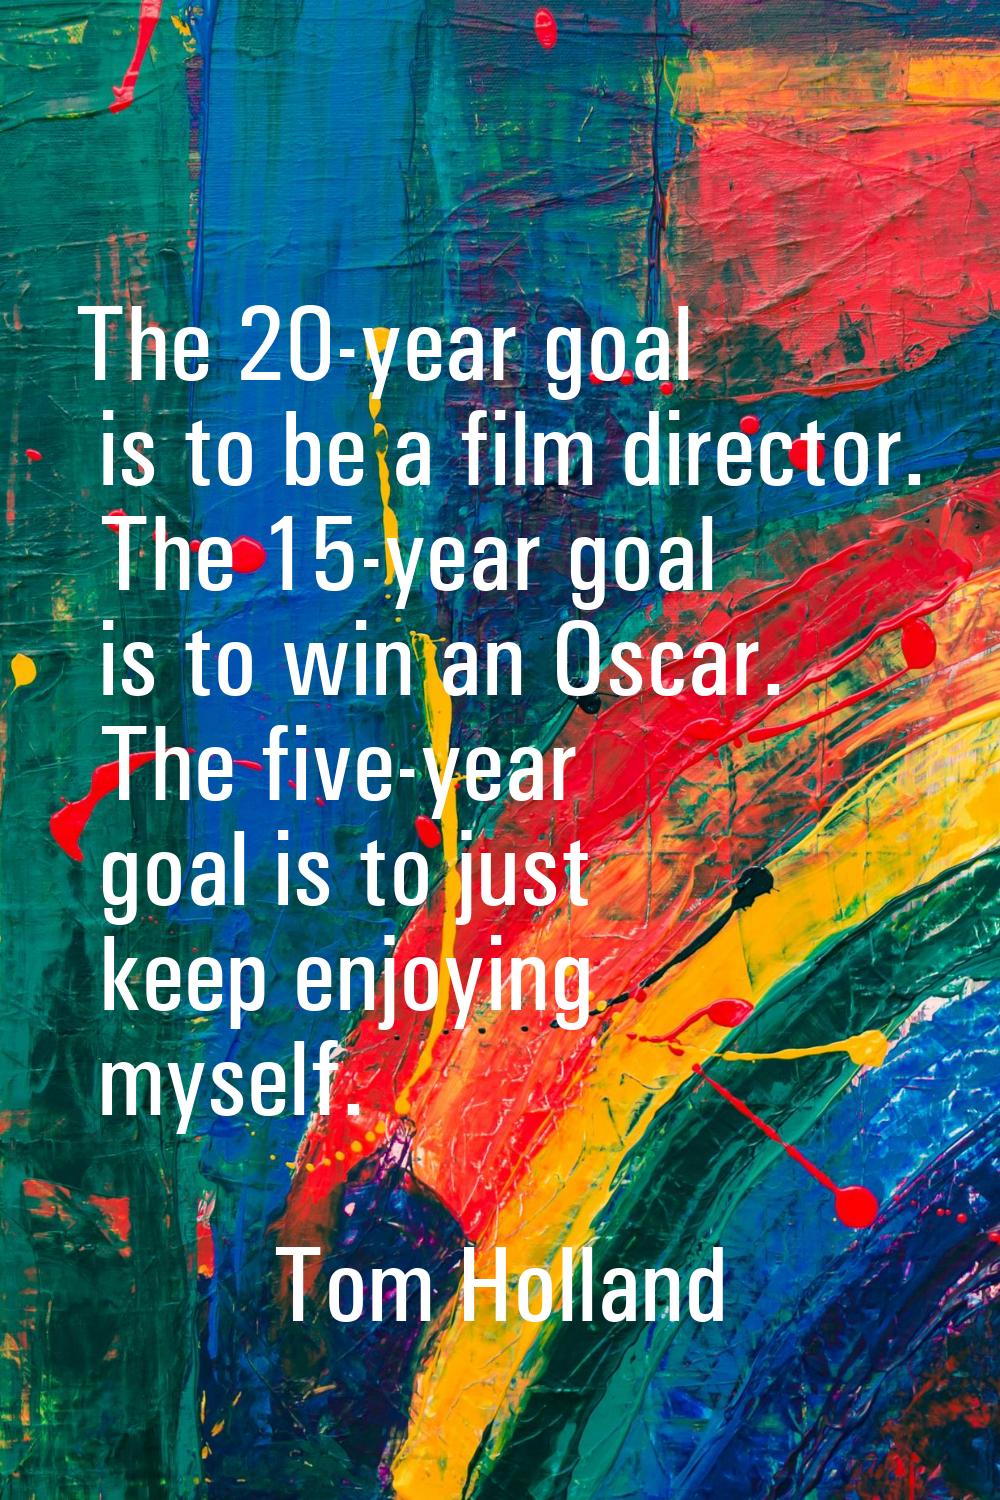 The 20-year goal is to be a film director. The 15-year goal is to win an Oscar. The five-year goal 